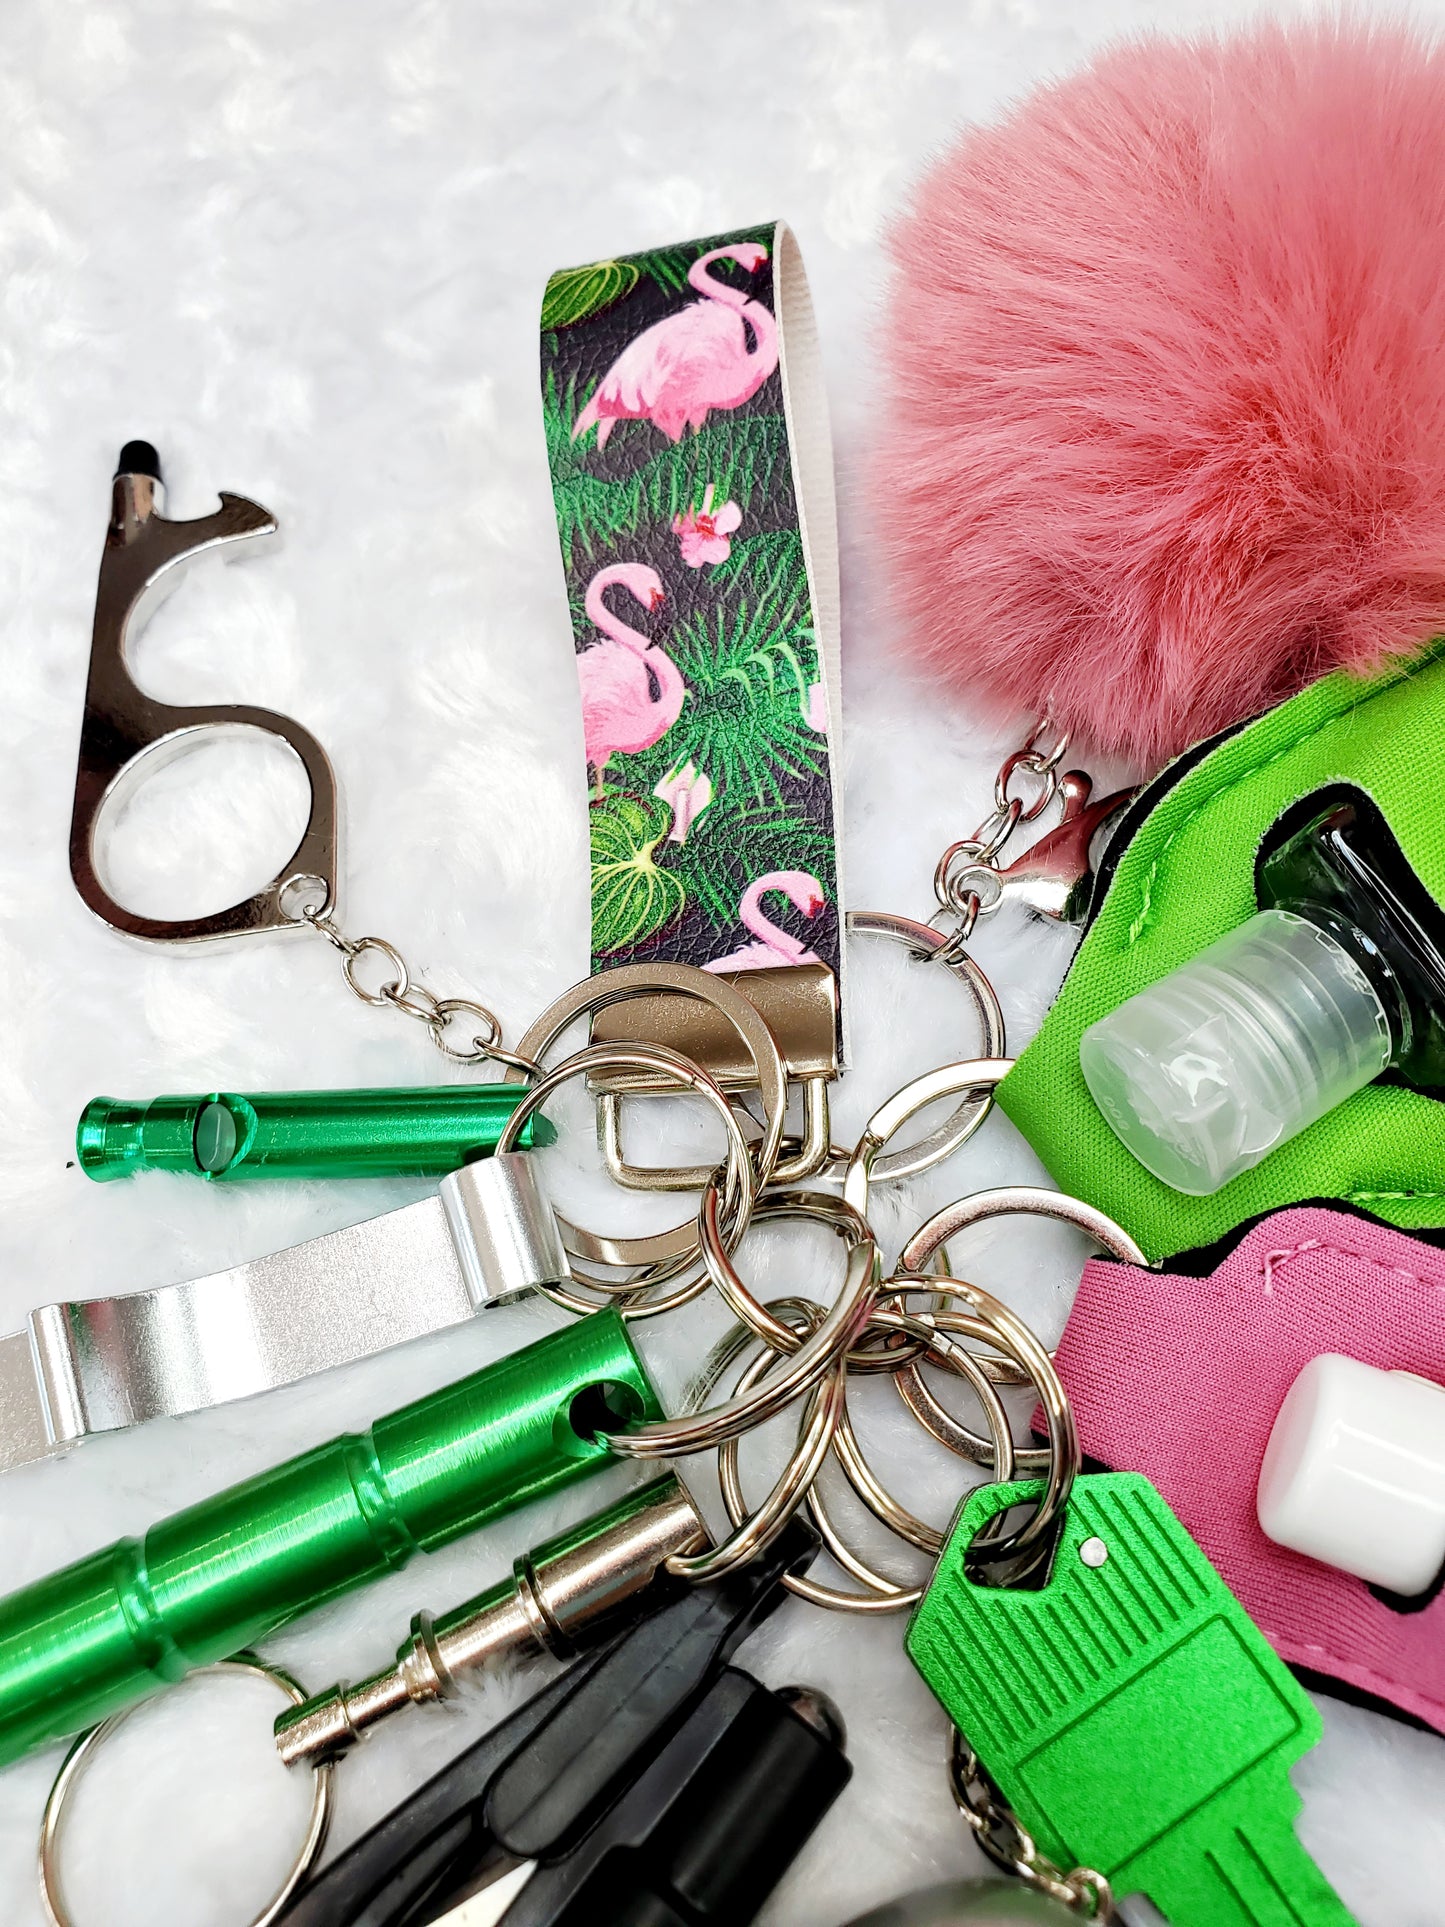 Flamingo (small) Finger Strap Safety Keychain - Personal Safety Kit 14 pc